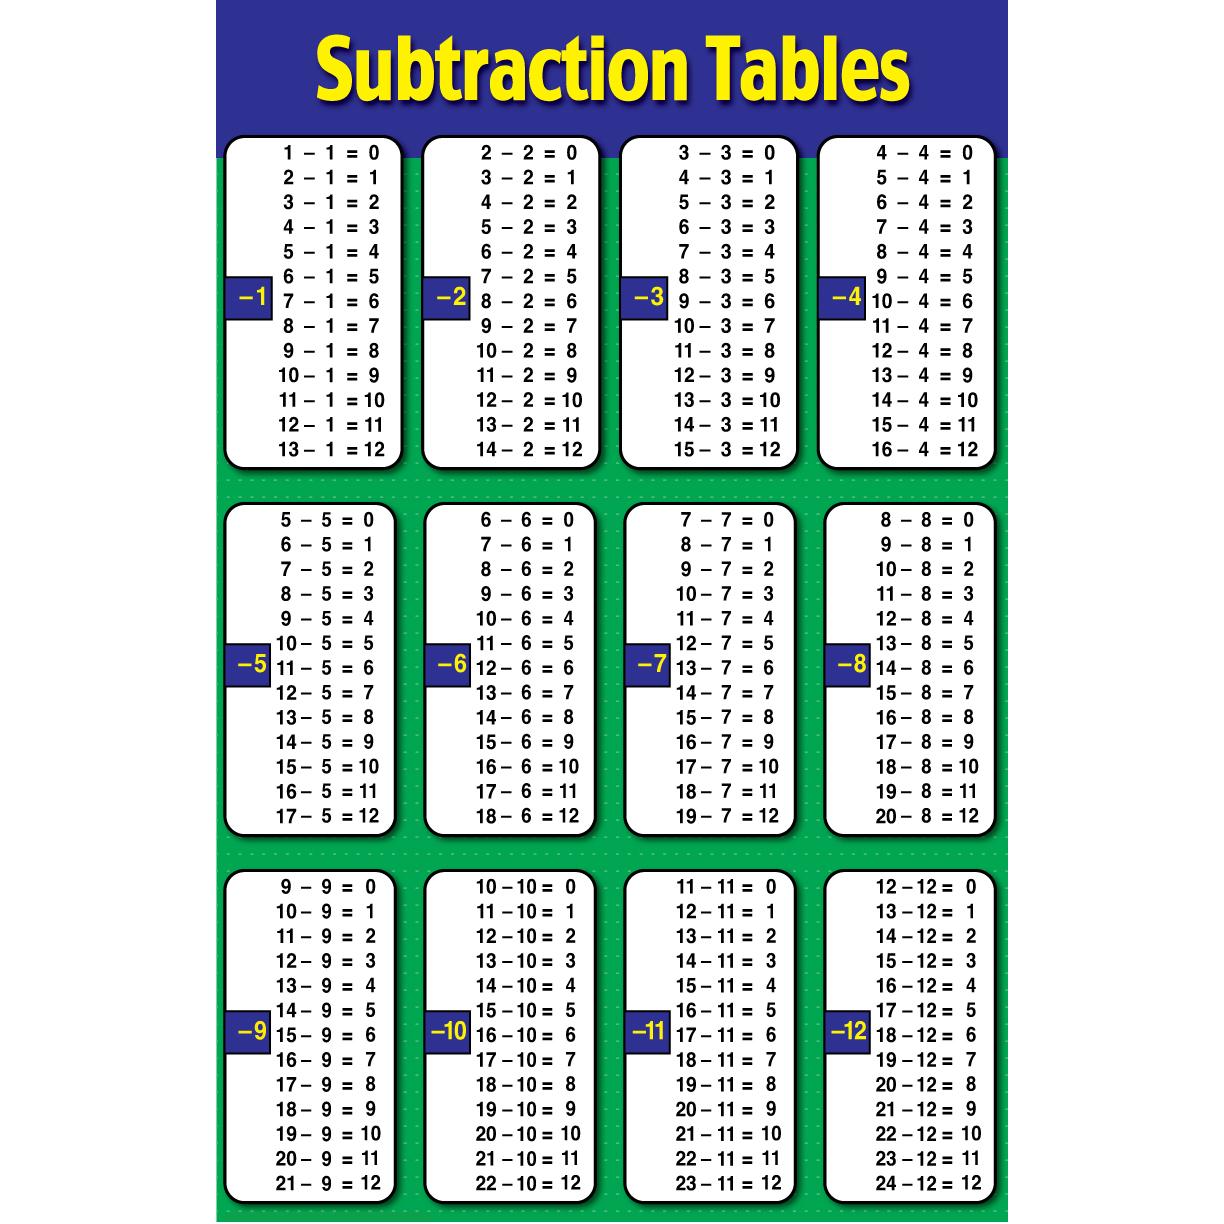 Subtraction Tables Educational Laminated Chart